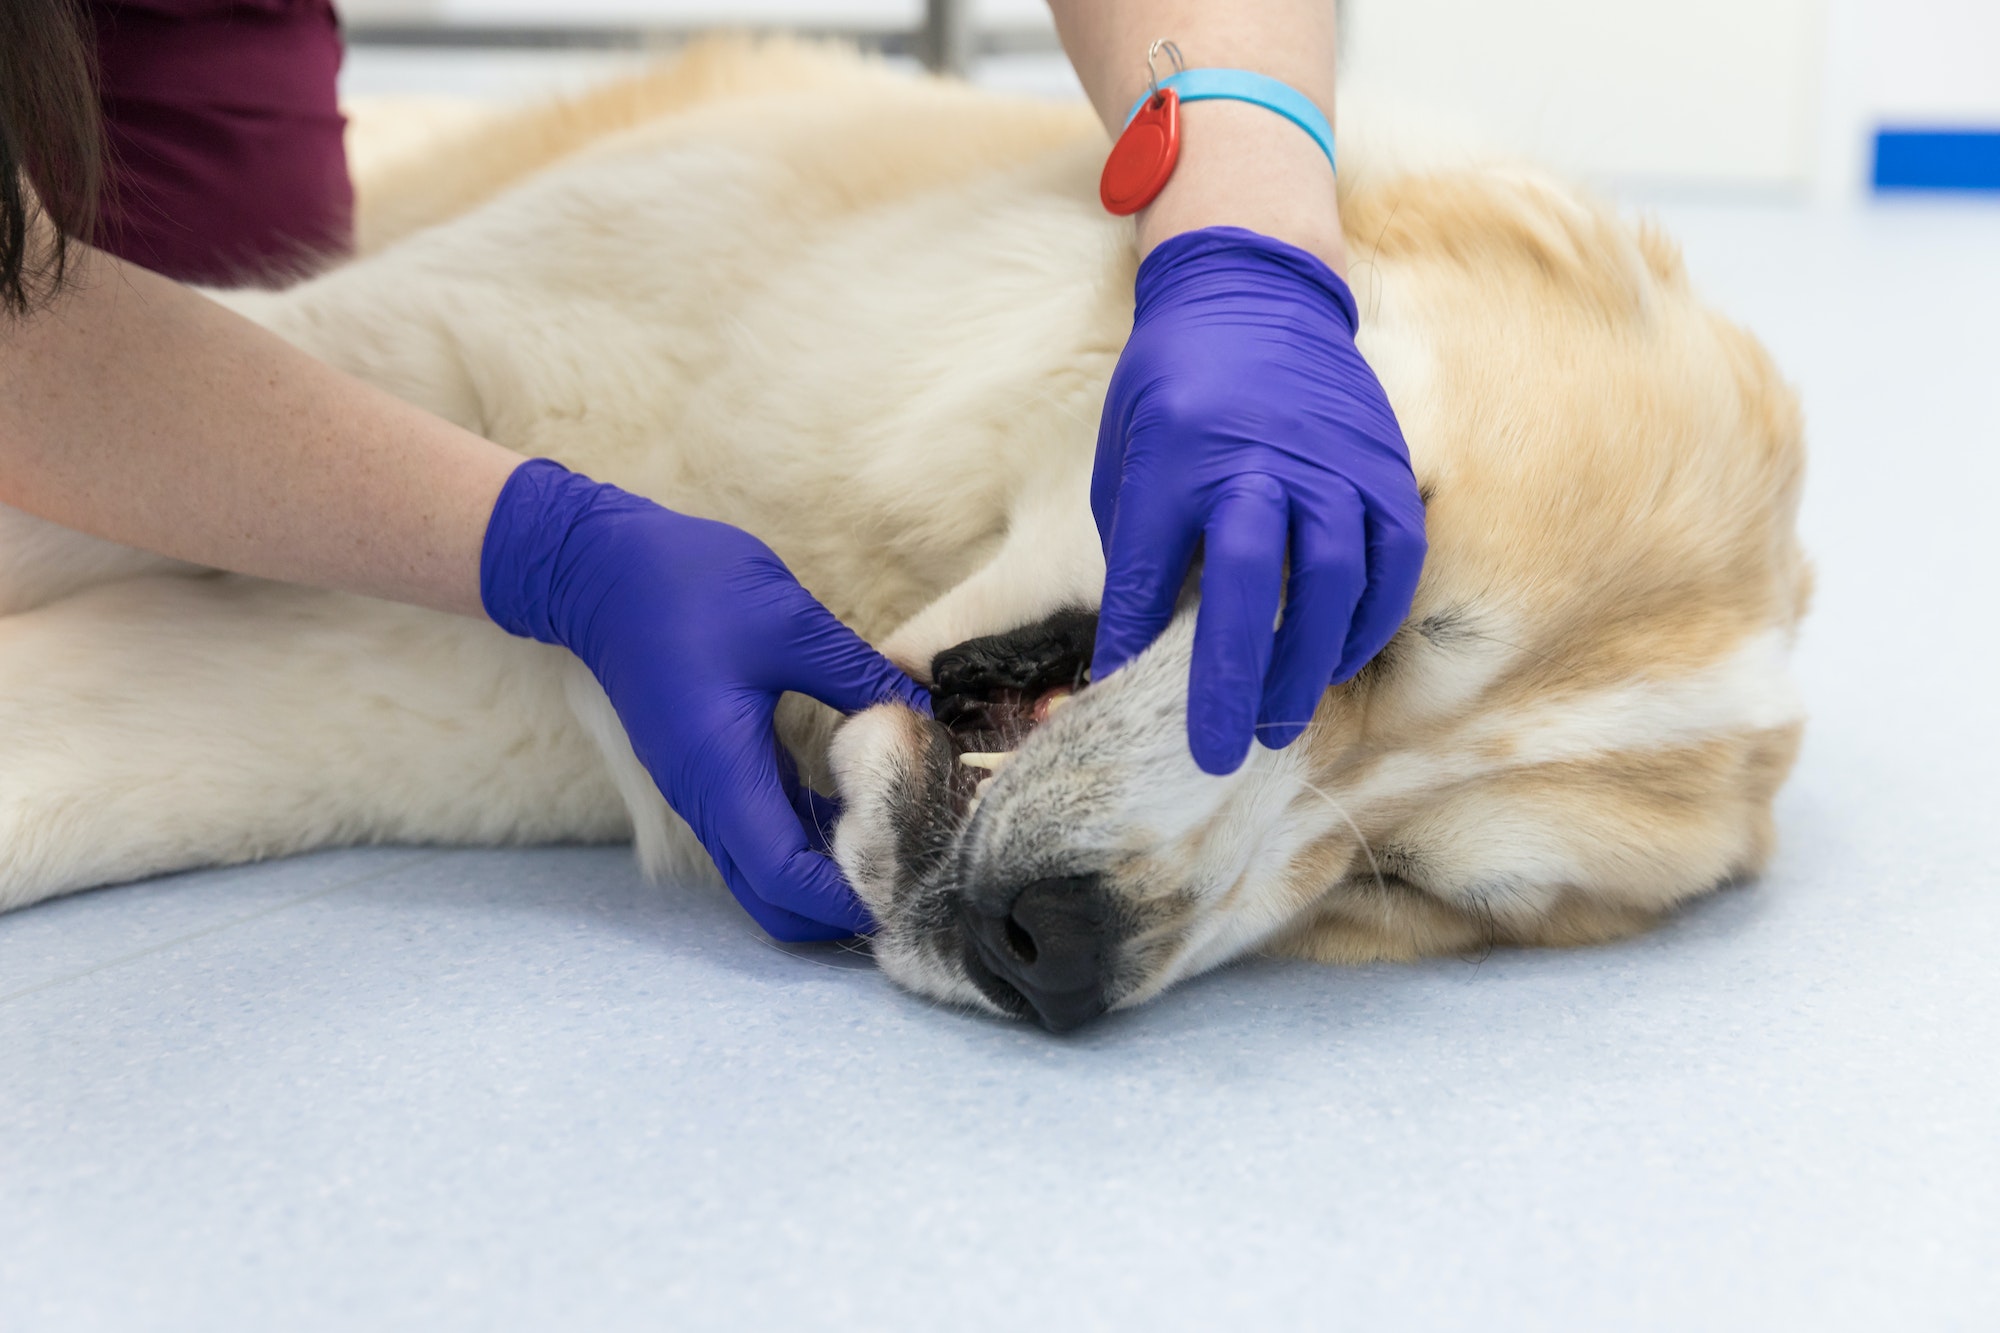 veterinarian checks teeth and gums of dog. Veterinarian doing oral inspection procedure.